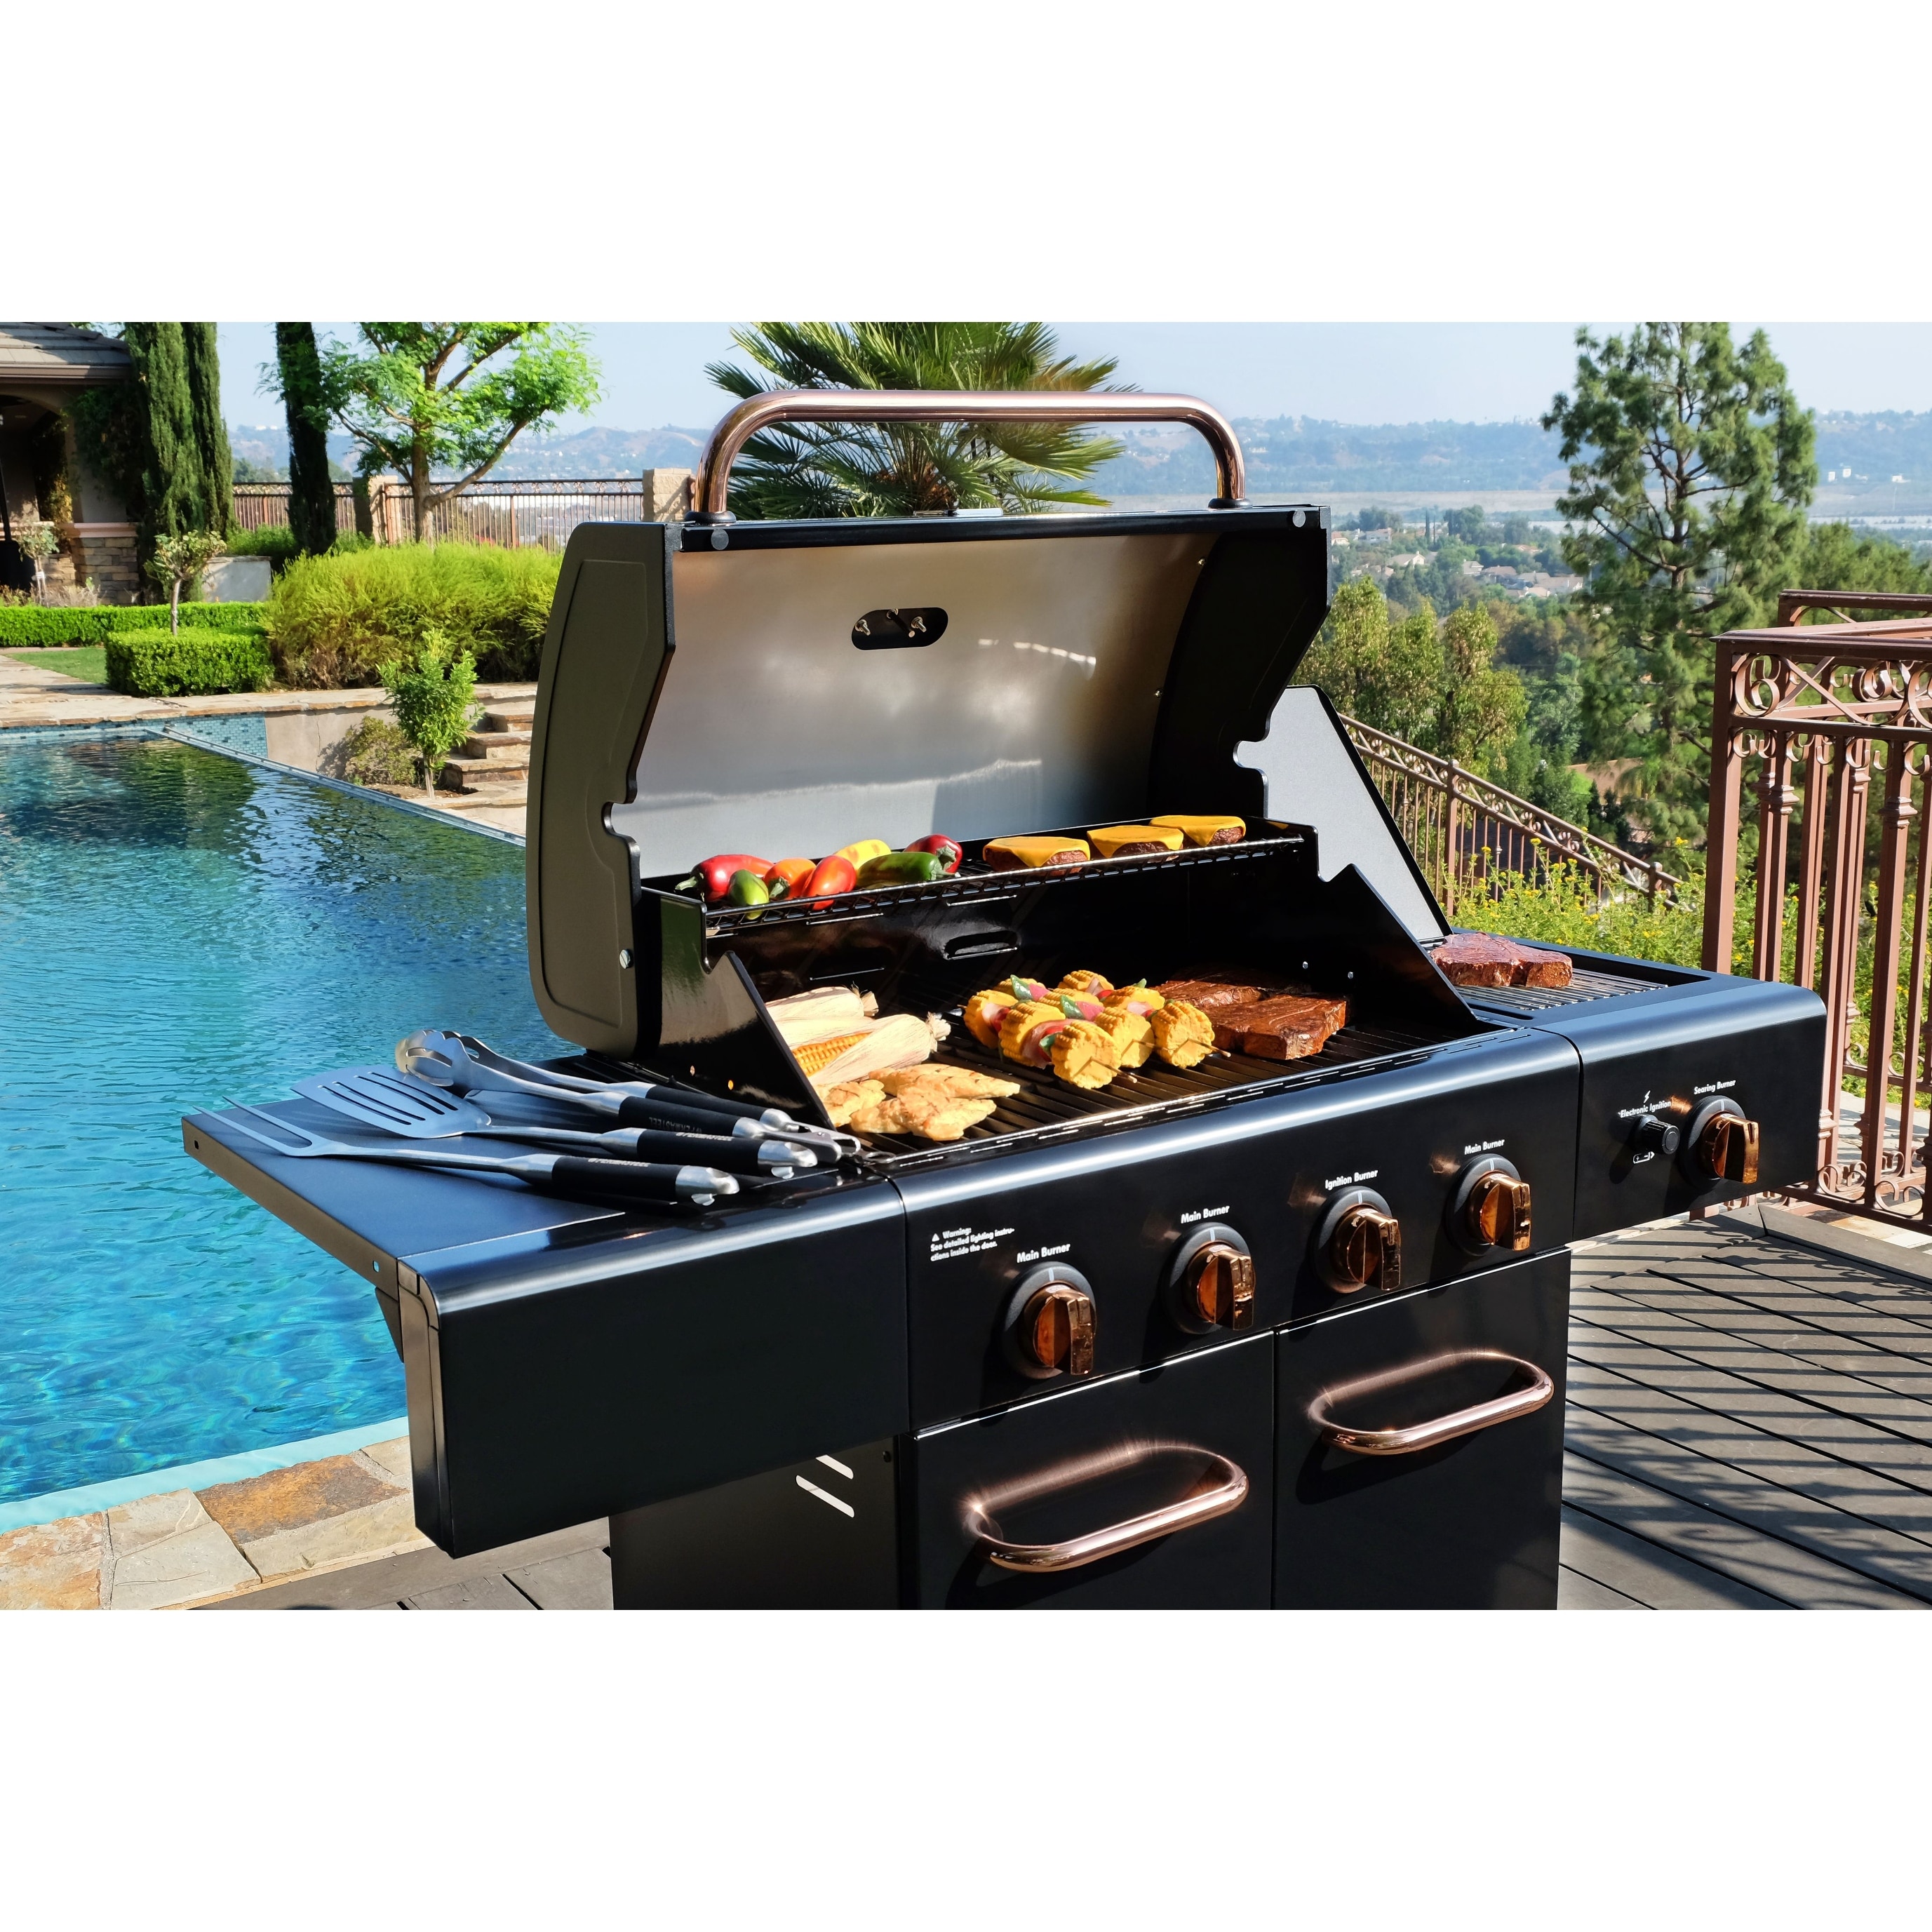 https://ak1.ostkcdn.com/images/products/is/images/direct/842c515fc8551093e9fa508db0f8f1788de4c74f/Kenmore-4-Burner-plus-Searing-Side-Burner-Grill-with-Copper-Accents.jpg